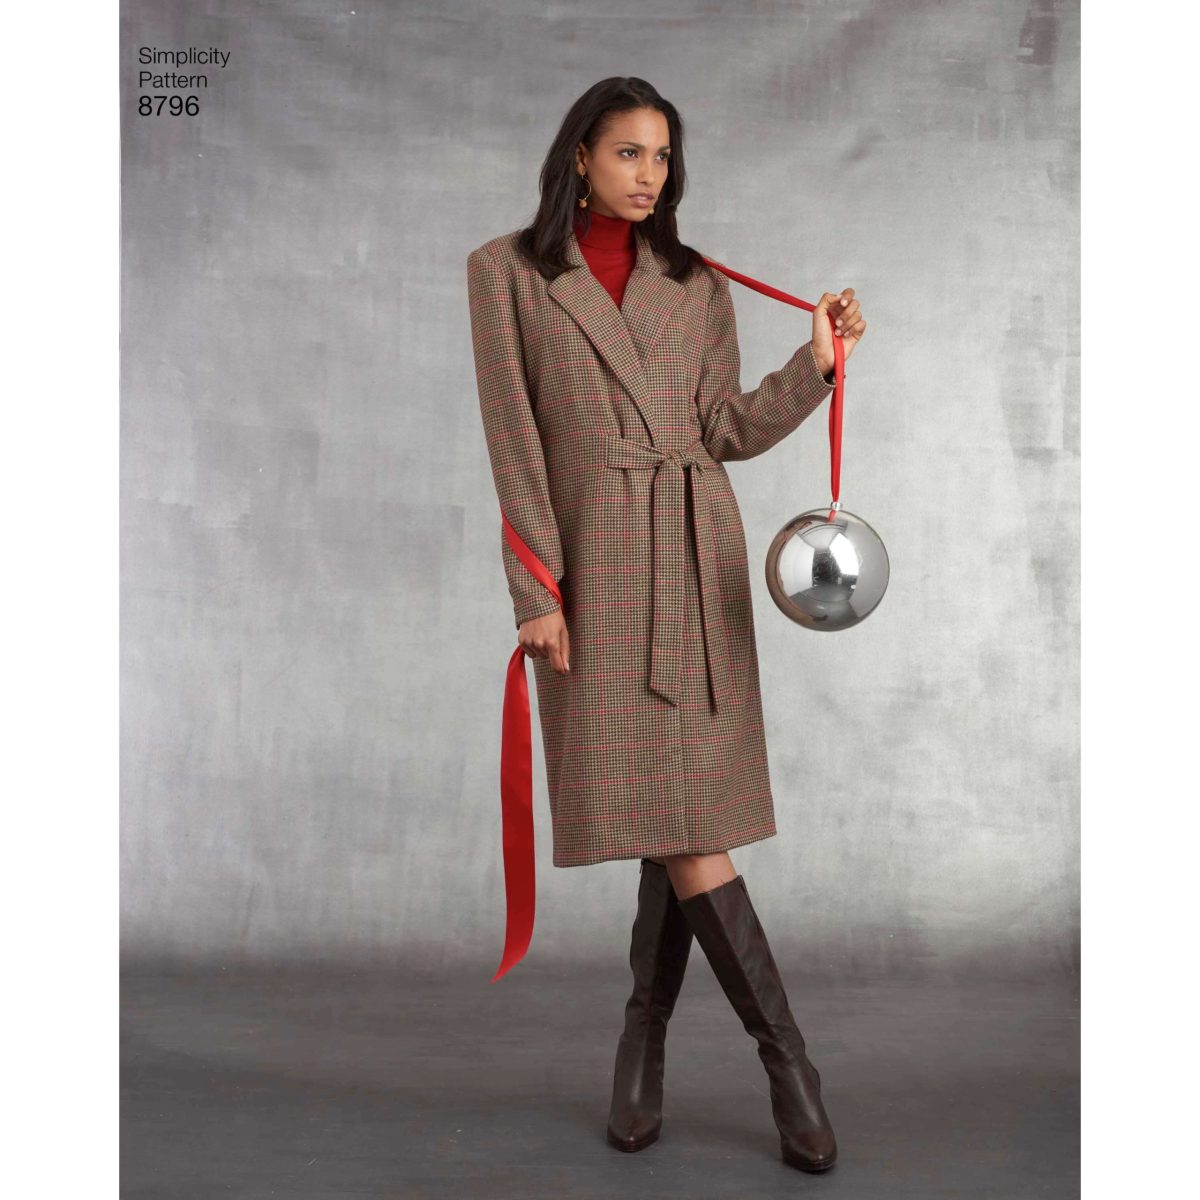 Simplicity Sewing Pattern 8796 Misses/ Petite Lined Coat